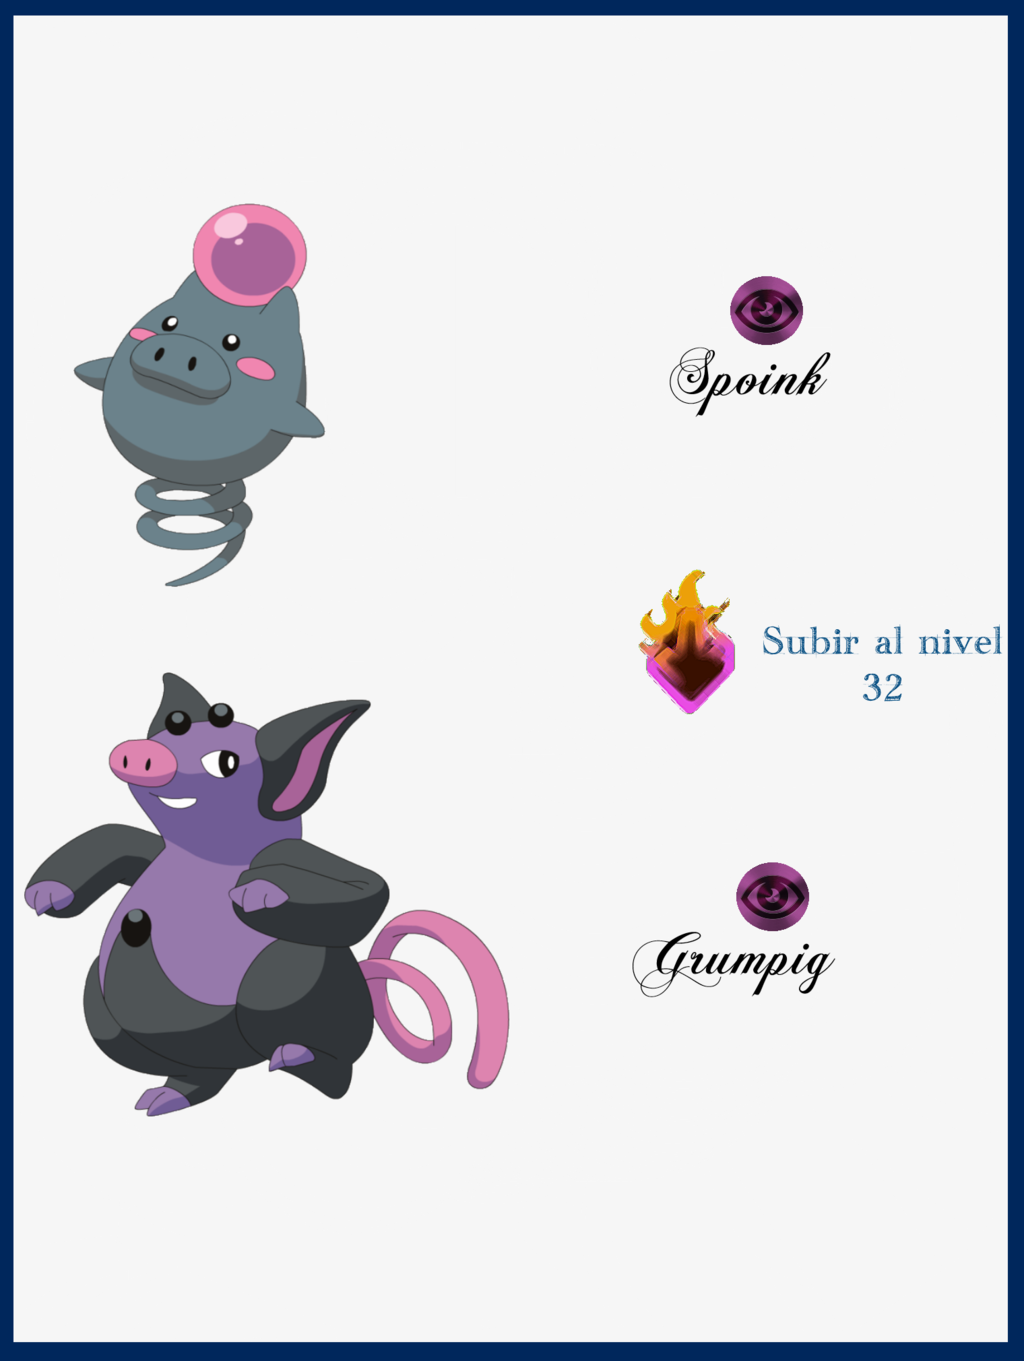 153 Spoink Evoluciones by Maxconnery on DeviantArt